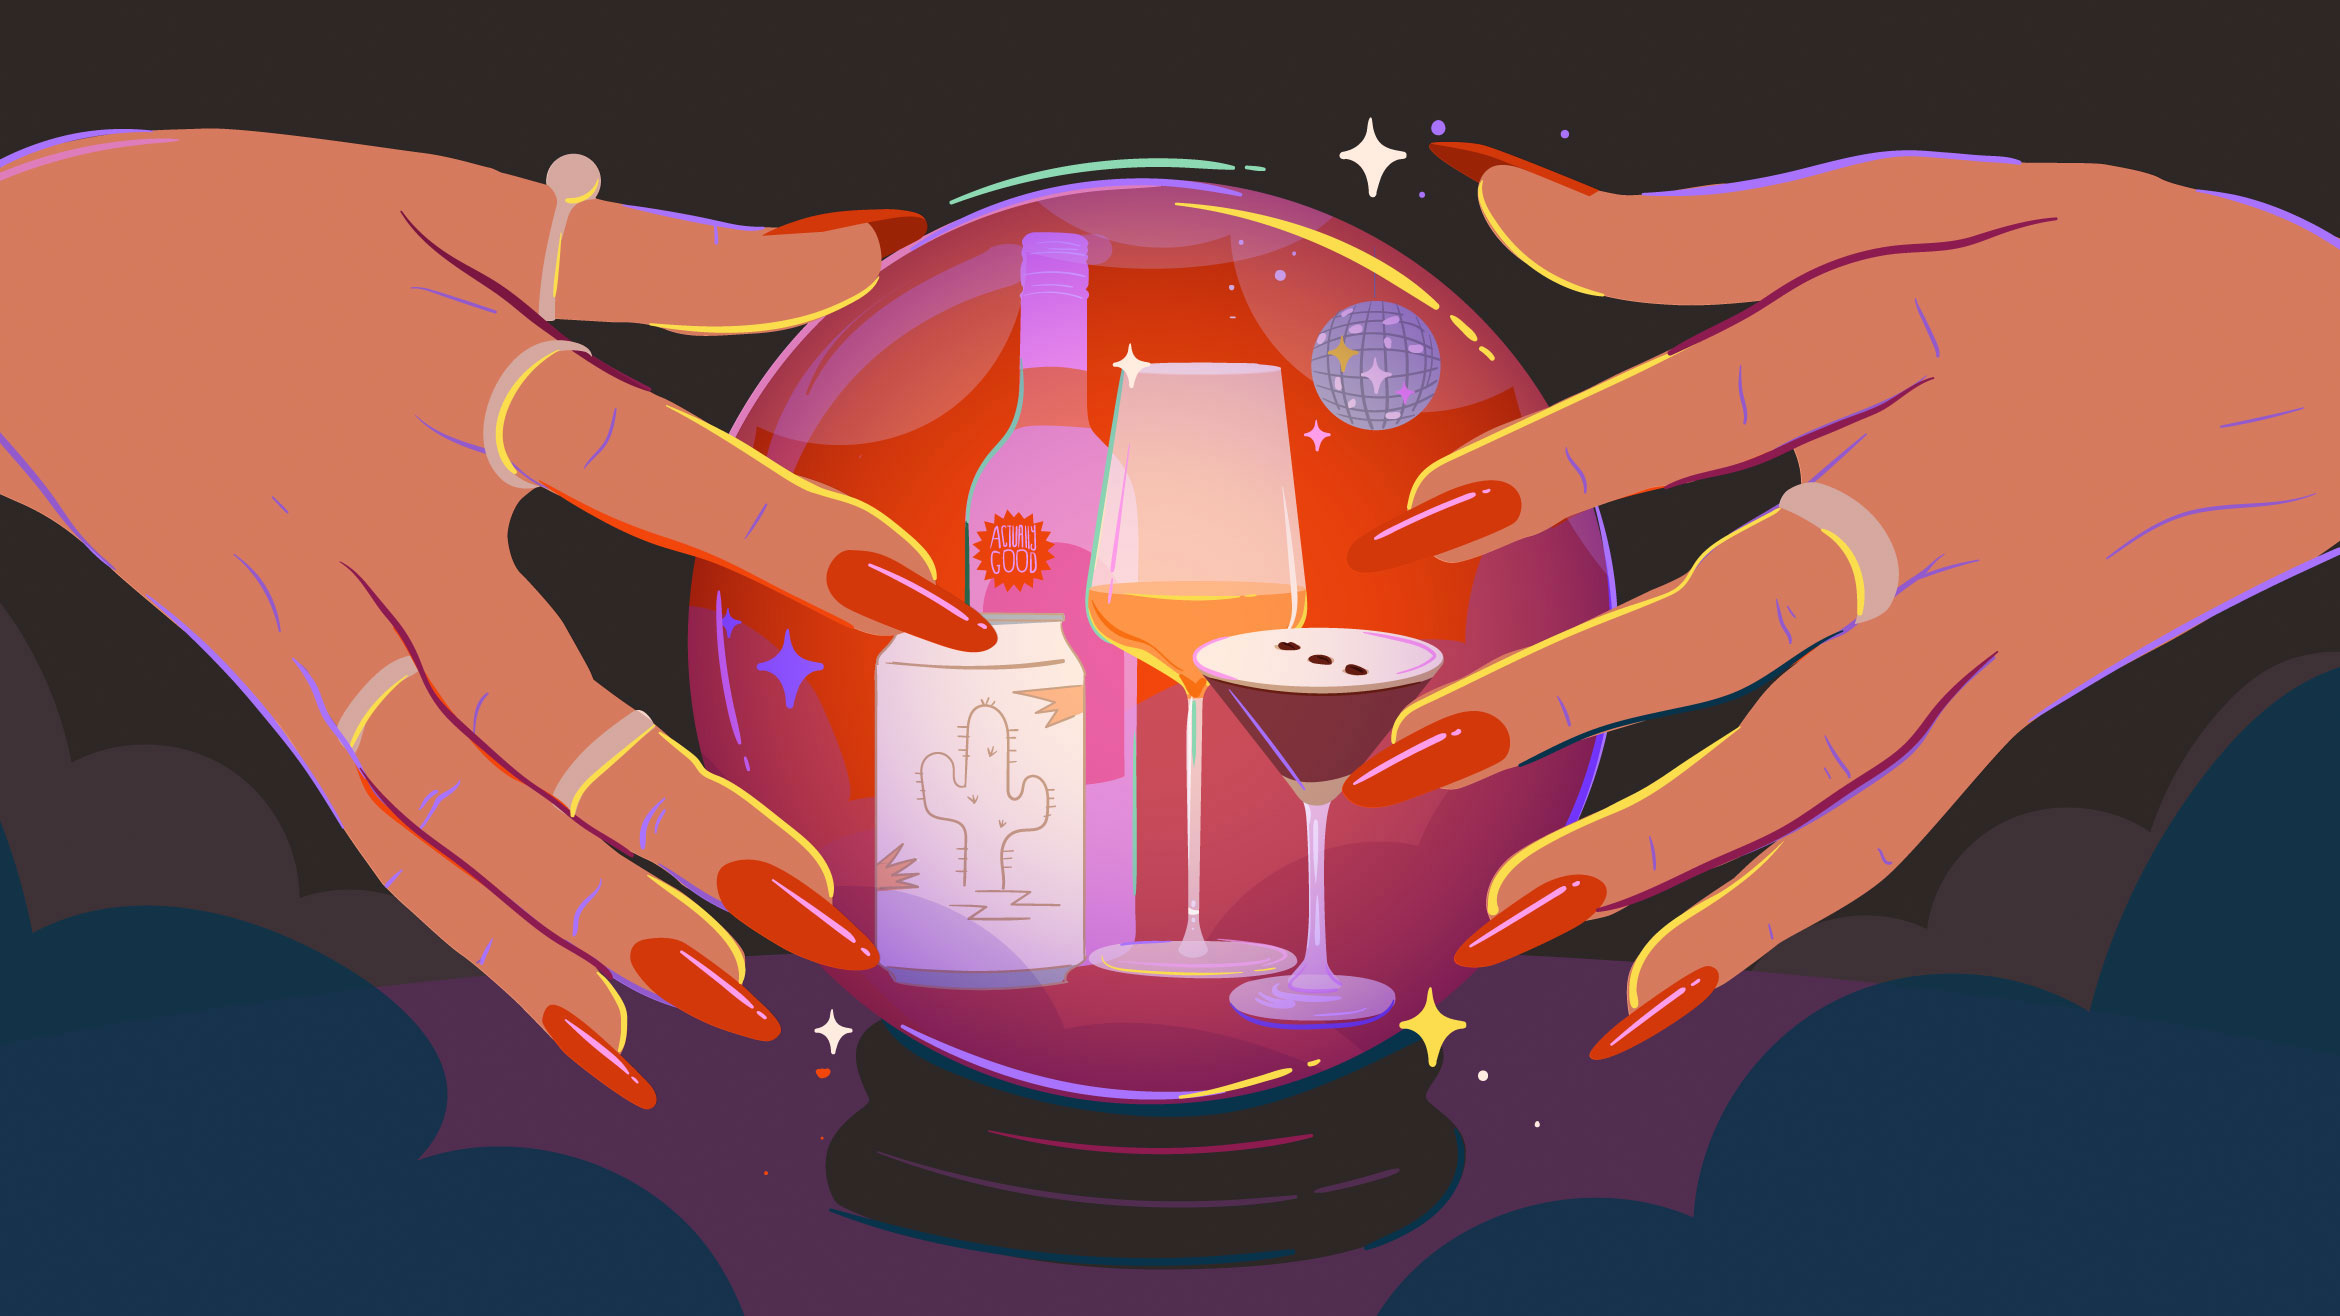 Illustration of different kinds of drinks — two glasses of wine, a can of beer, and a bottle — appearing inside a crystal ball.